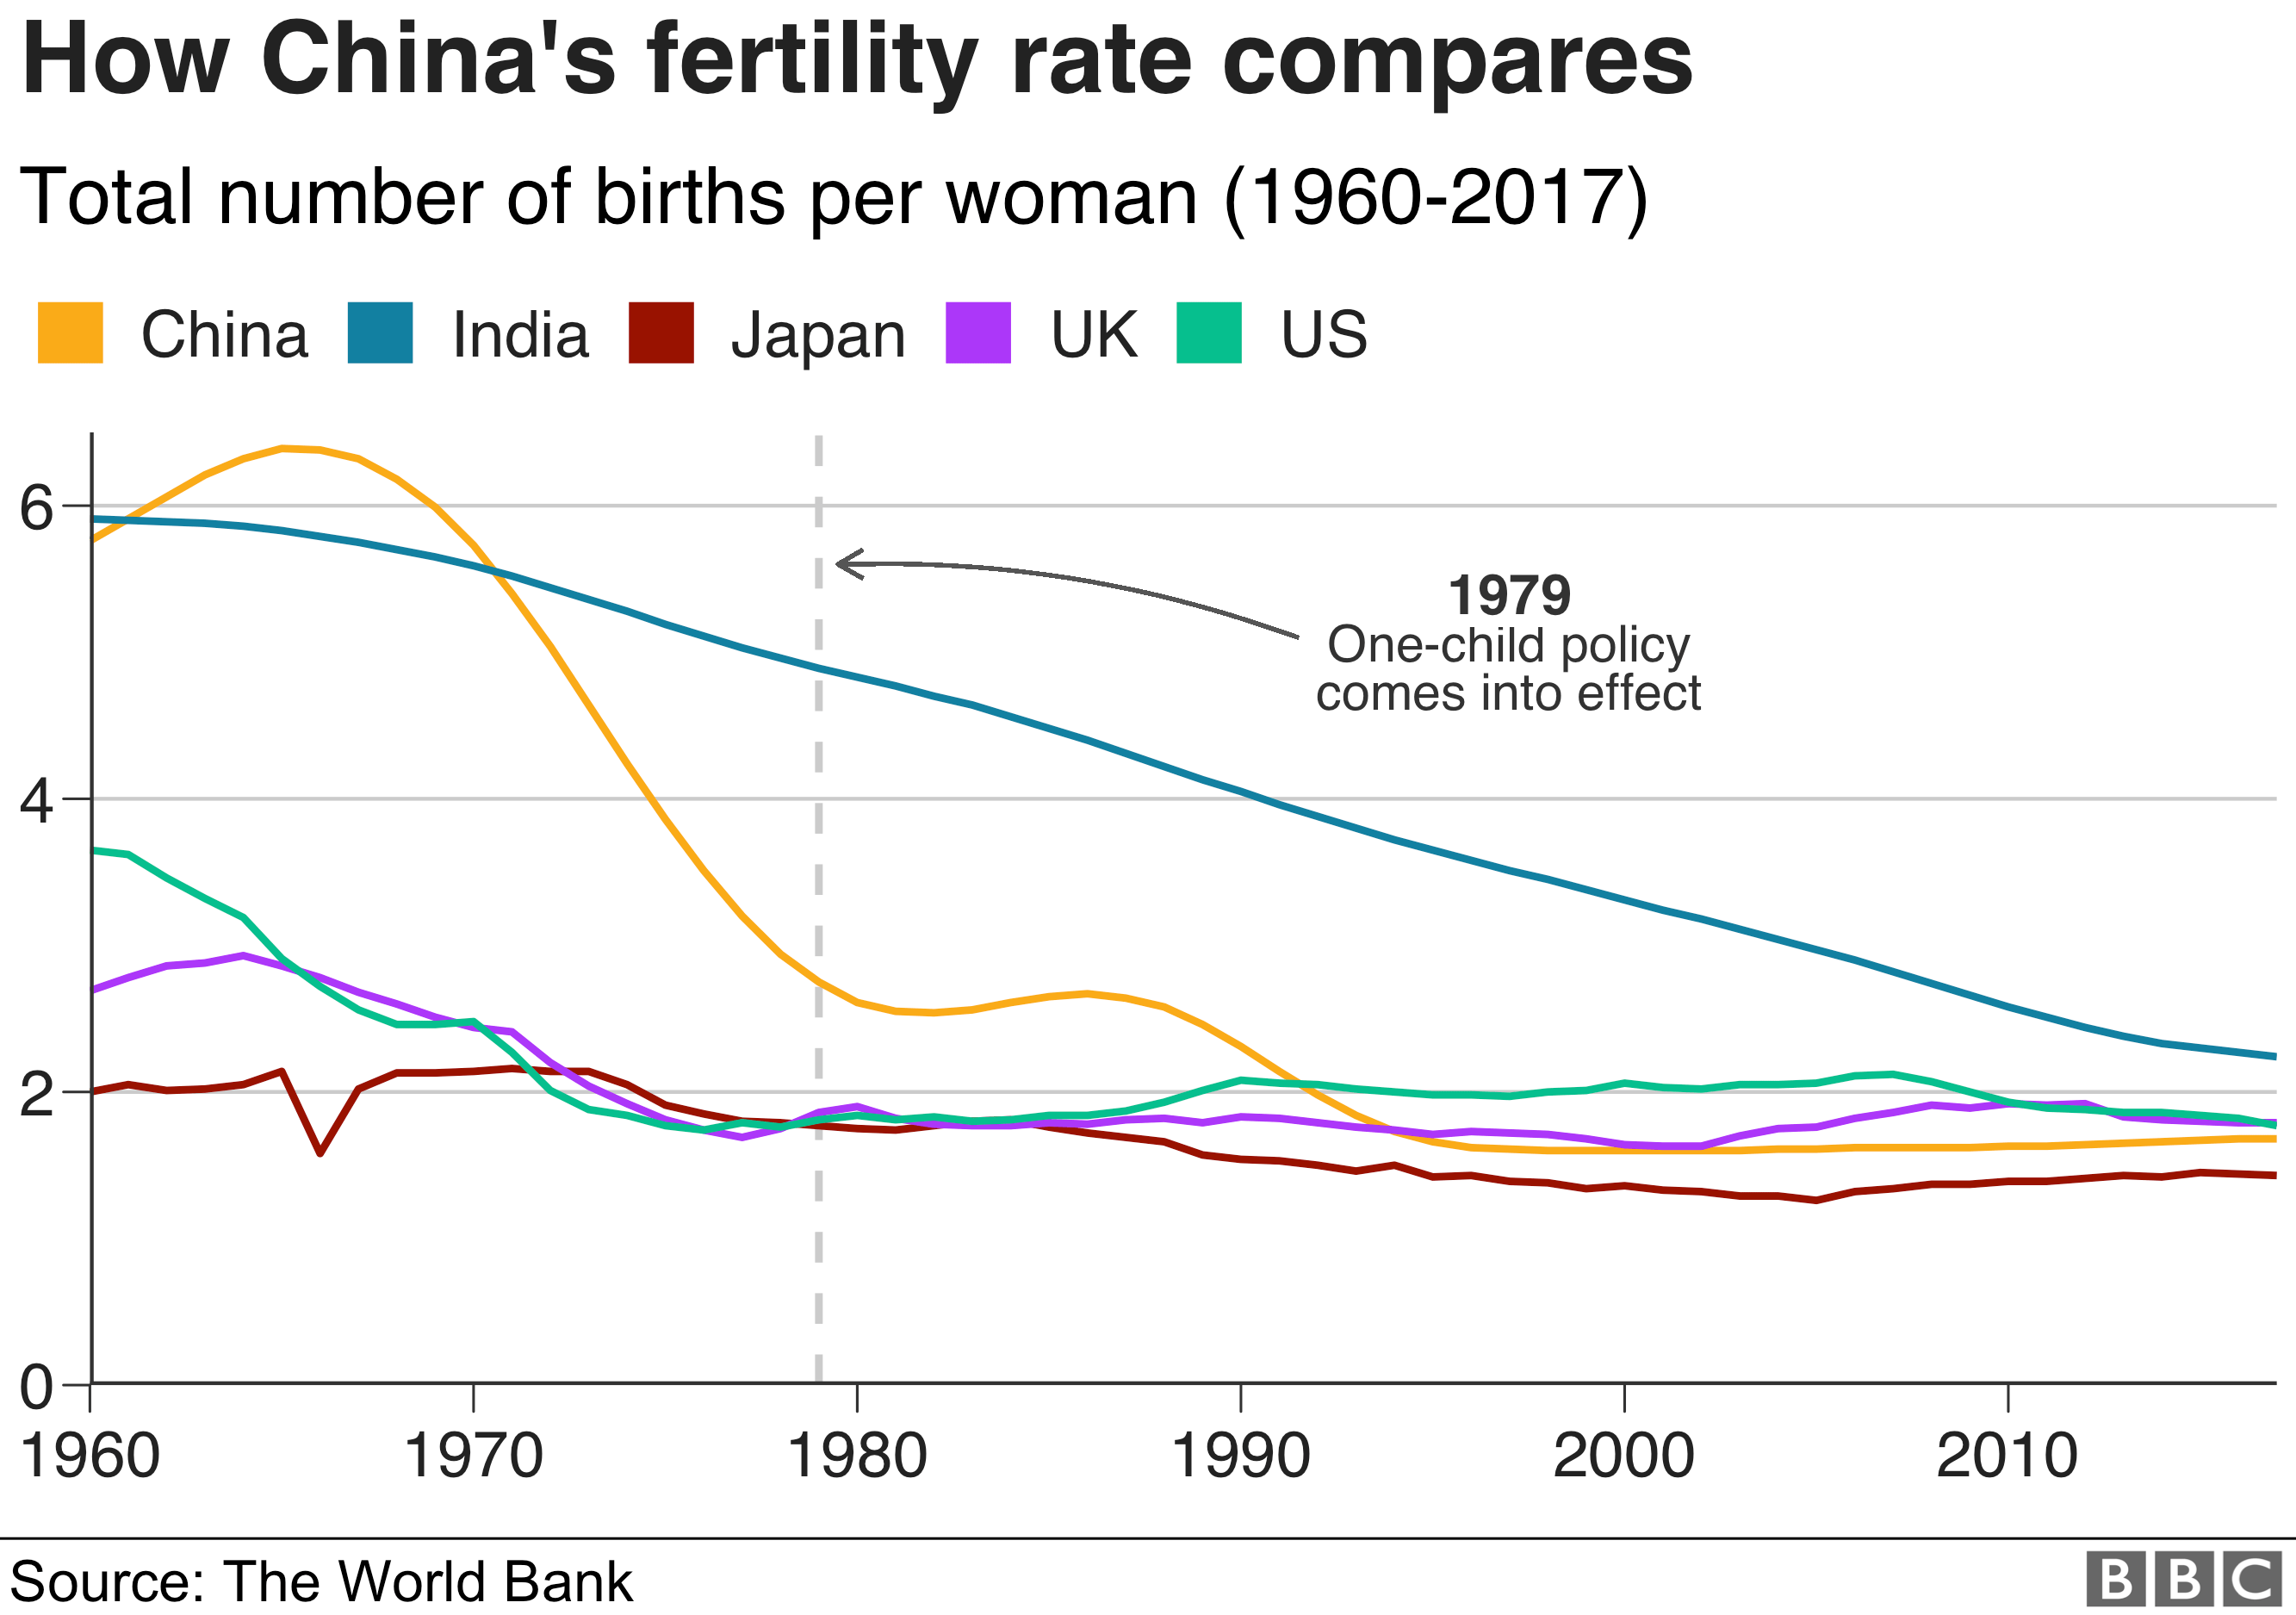 Chart showing how China's fertility rate compares to other countries